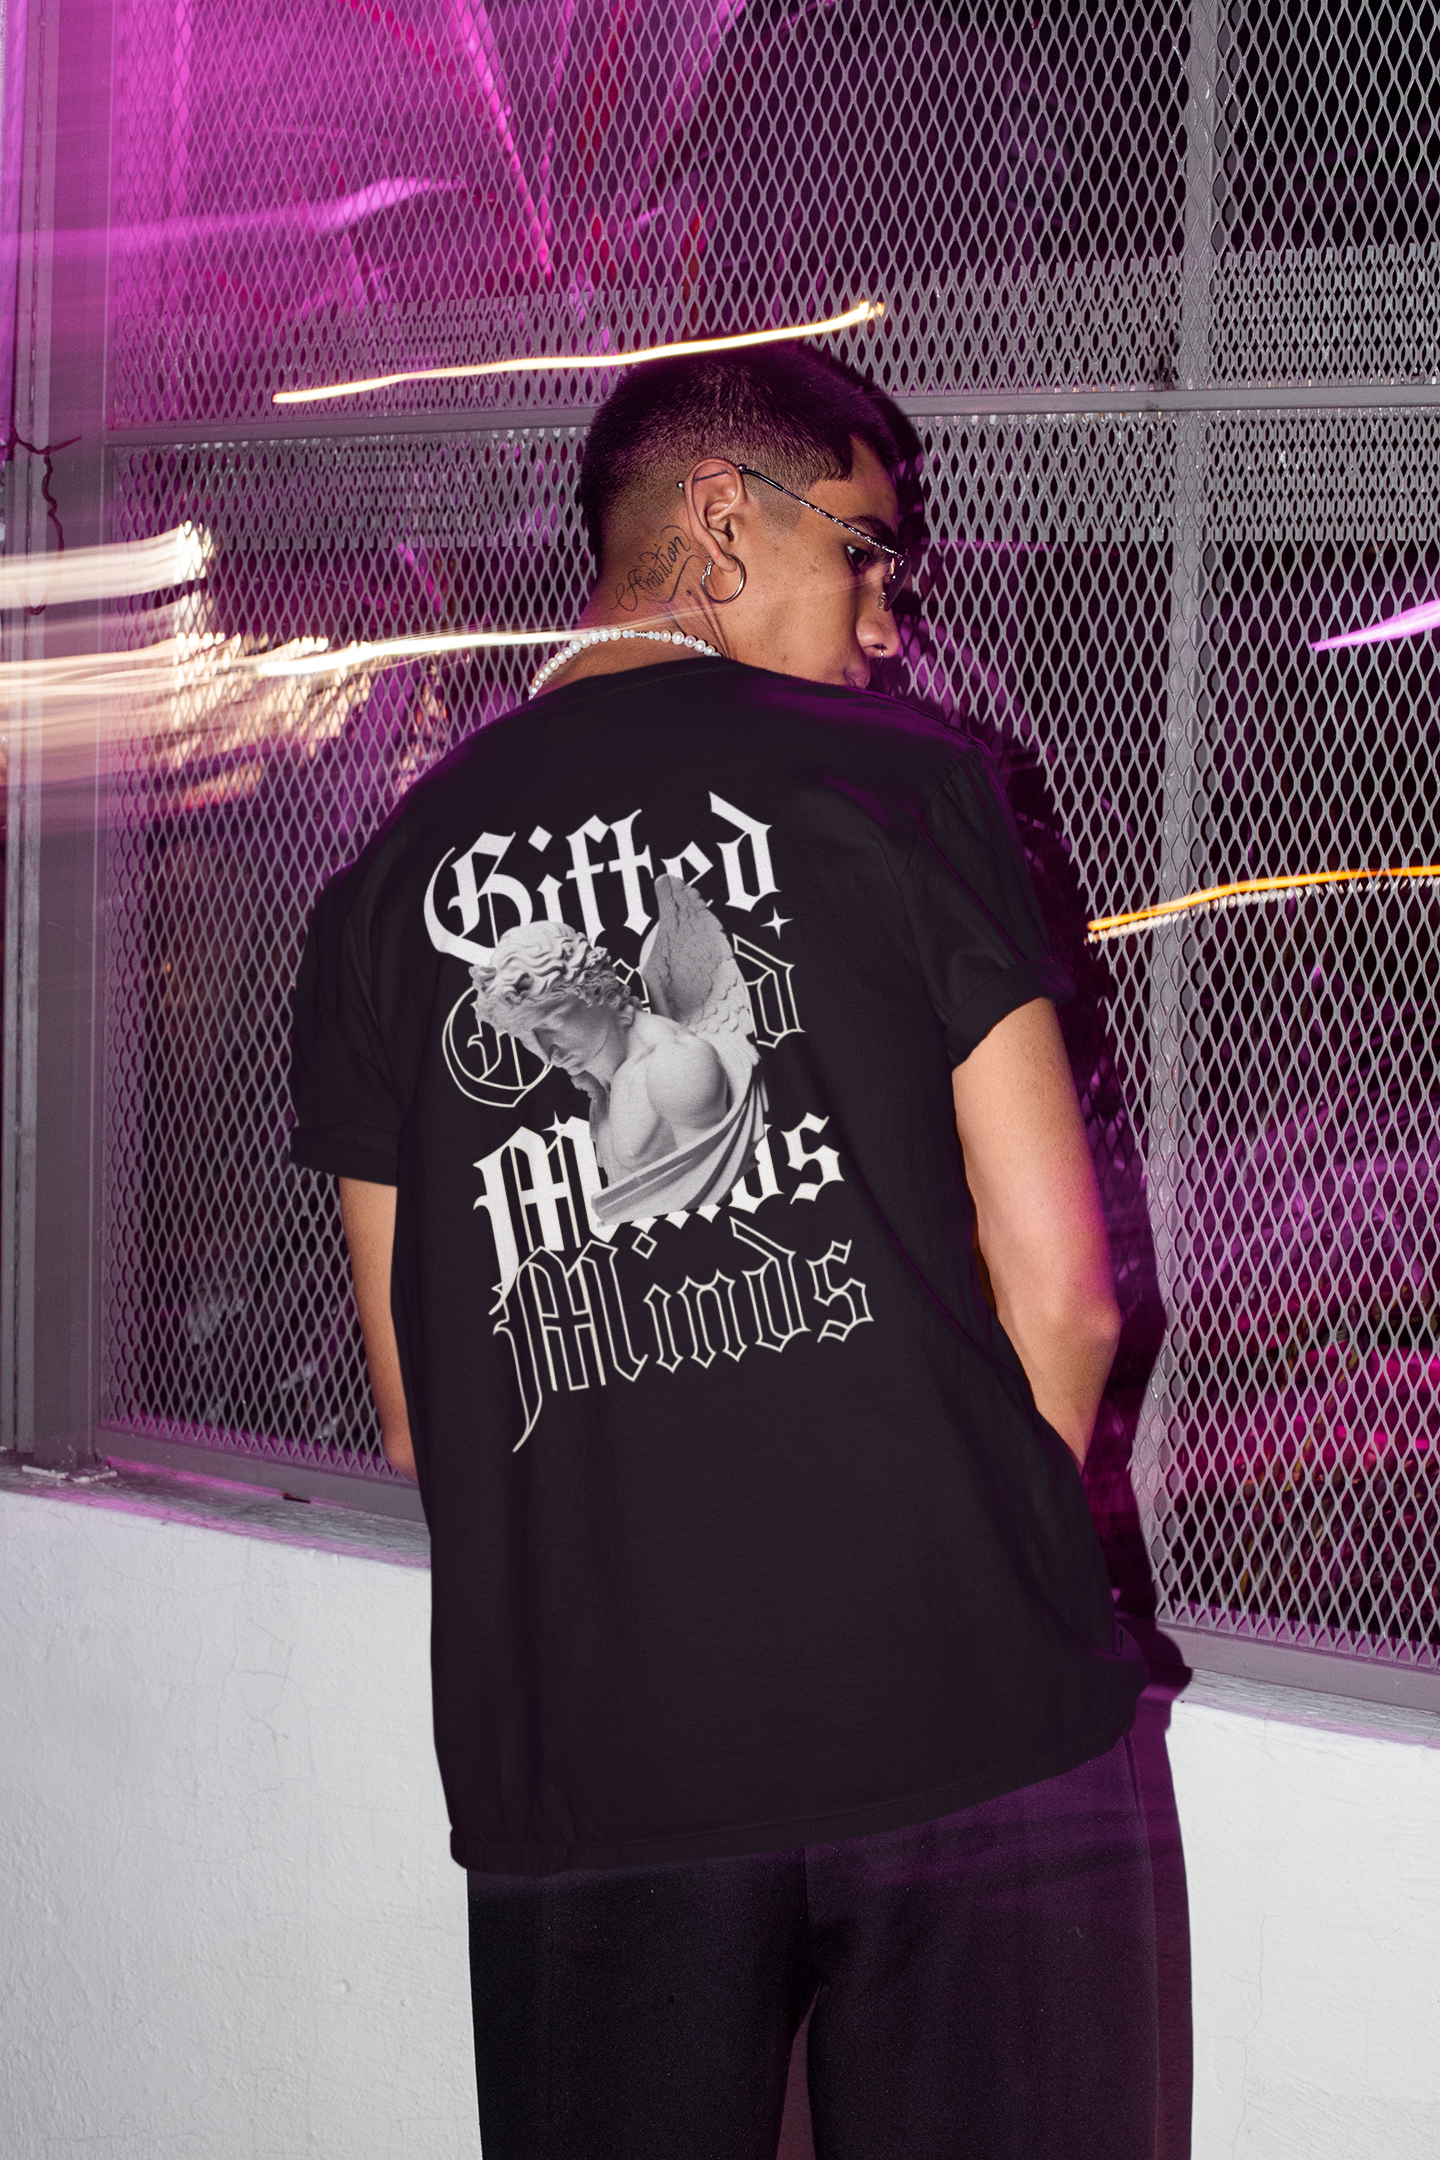 Gifted Minds Angel Short Sleeve Tee - GFTD MNDS